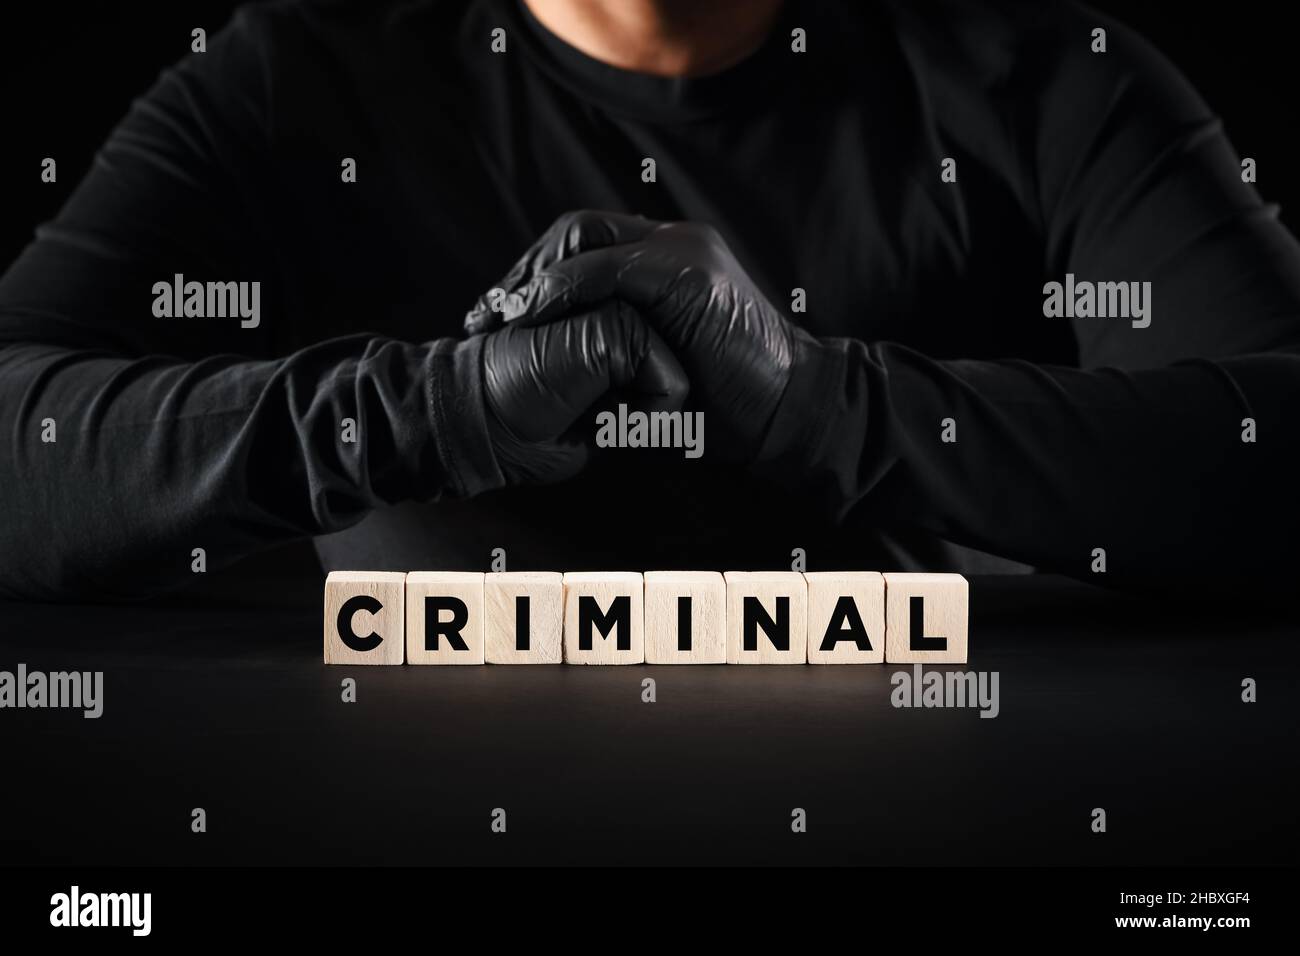 Crime, criminal, criminality, thief or burglar concept. The word criminal on wooden blocks with a criminal person background. Stock Photo